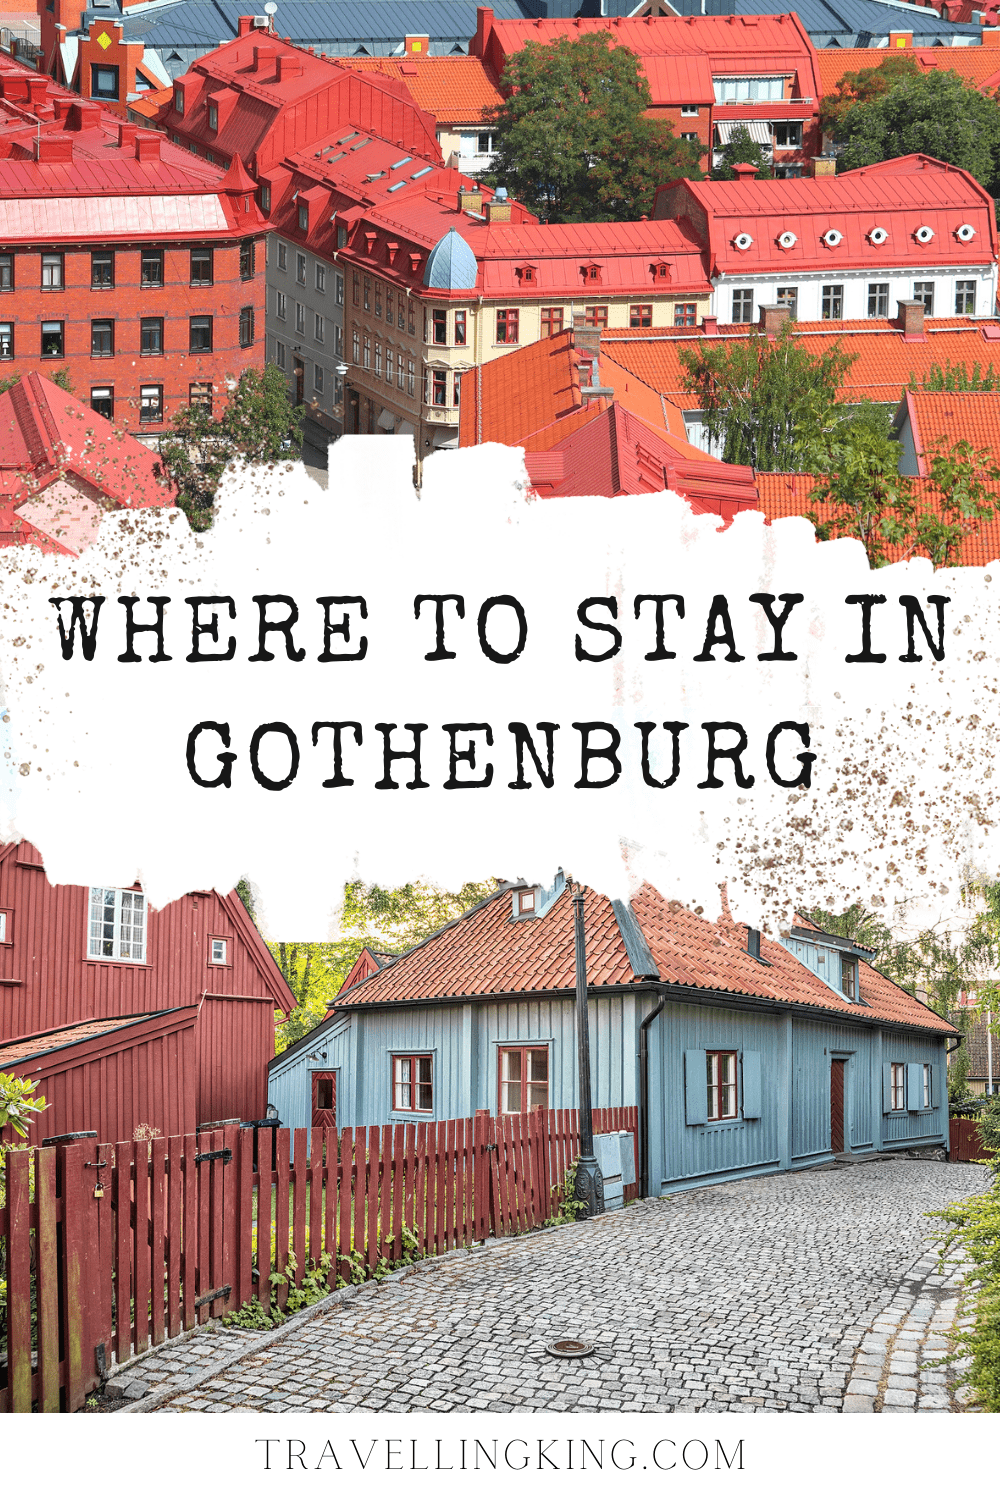 Where to stay in Gothenburg